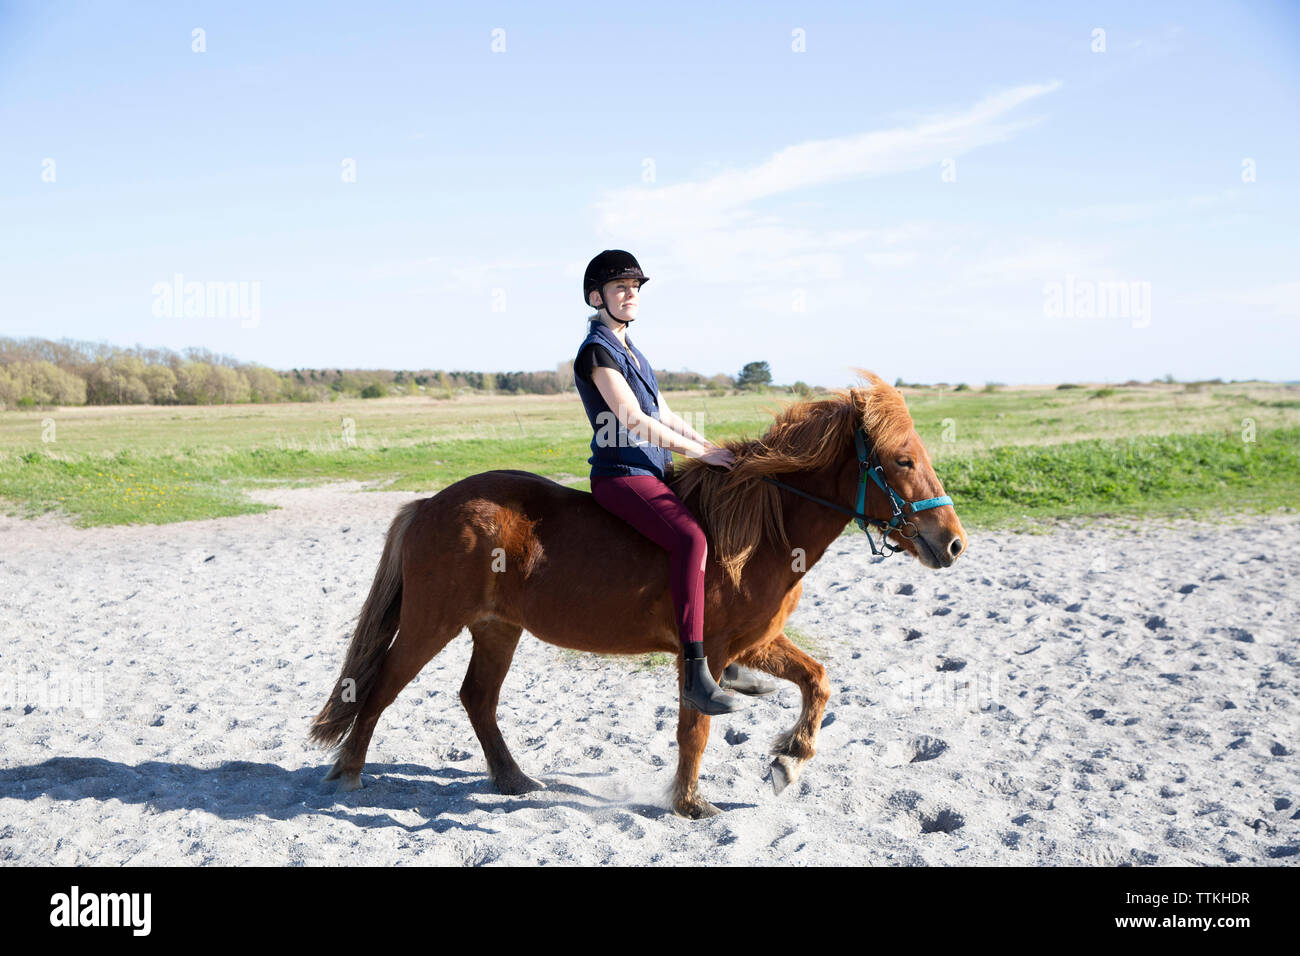 Woman horseback riding on sand at beach during sunny day Stock Photo